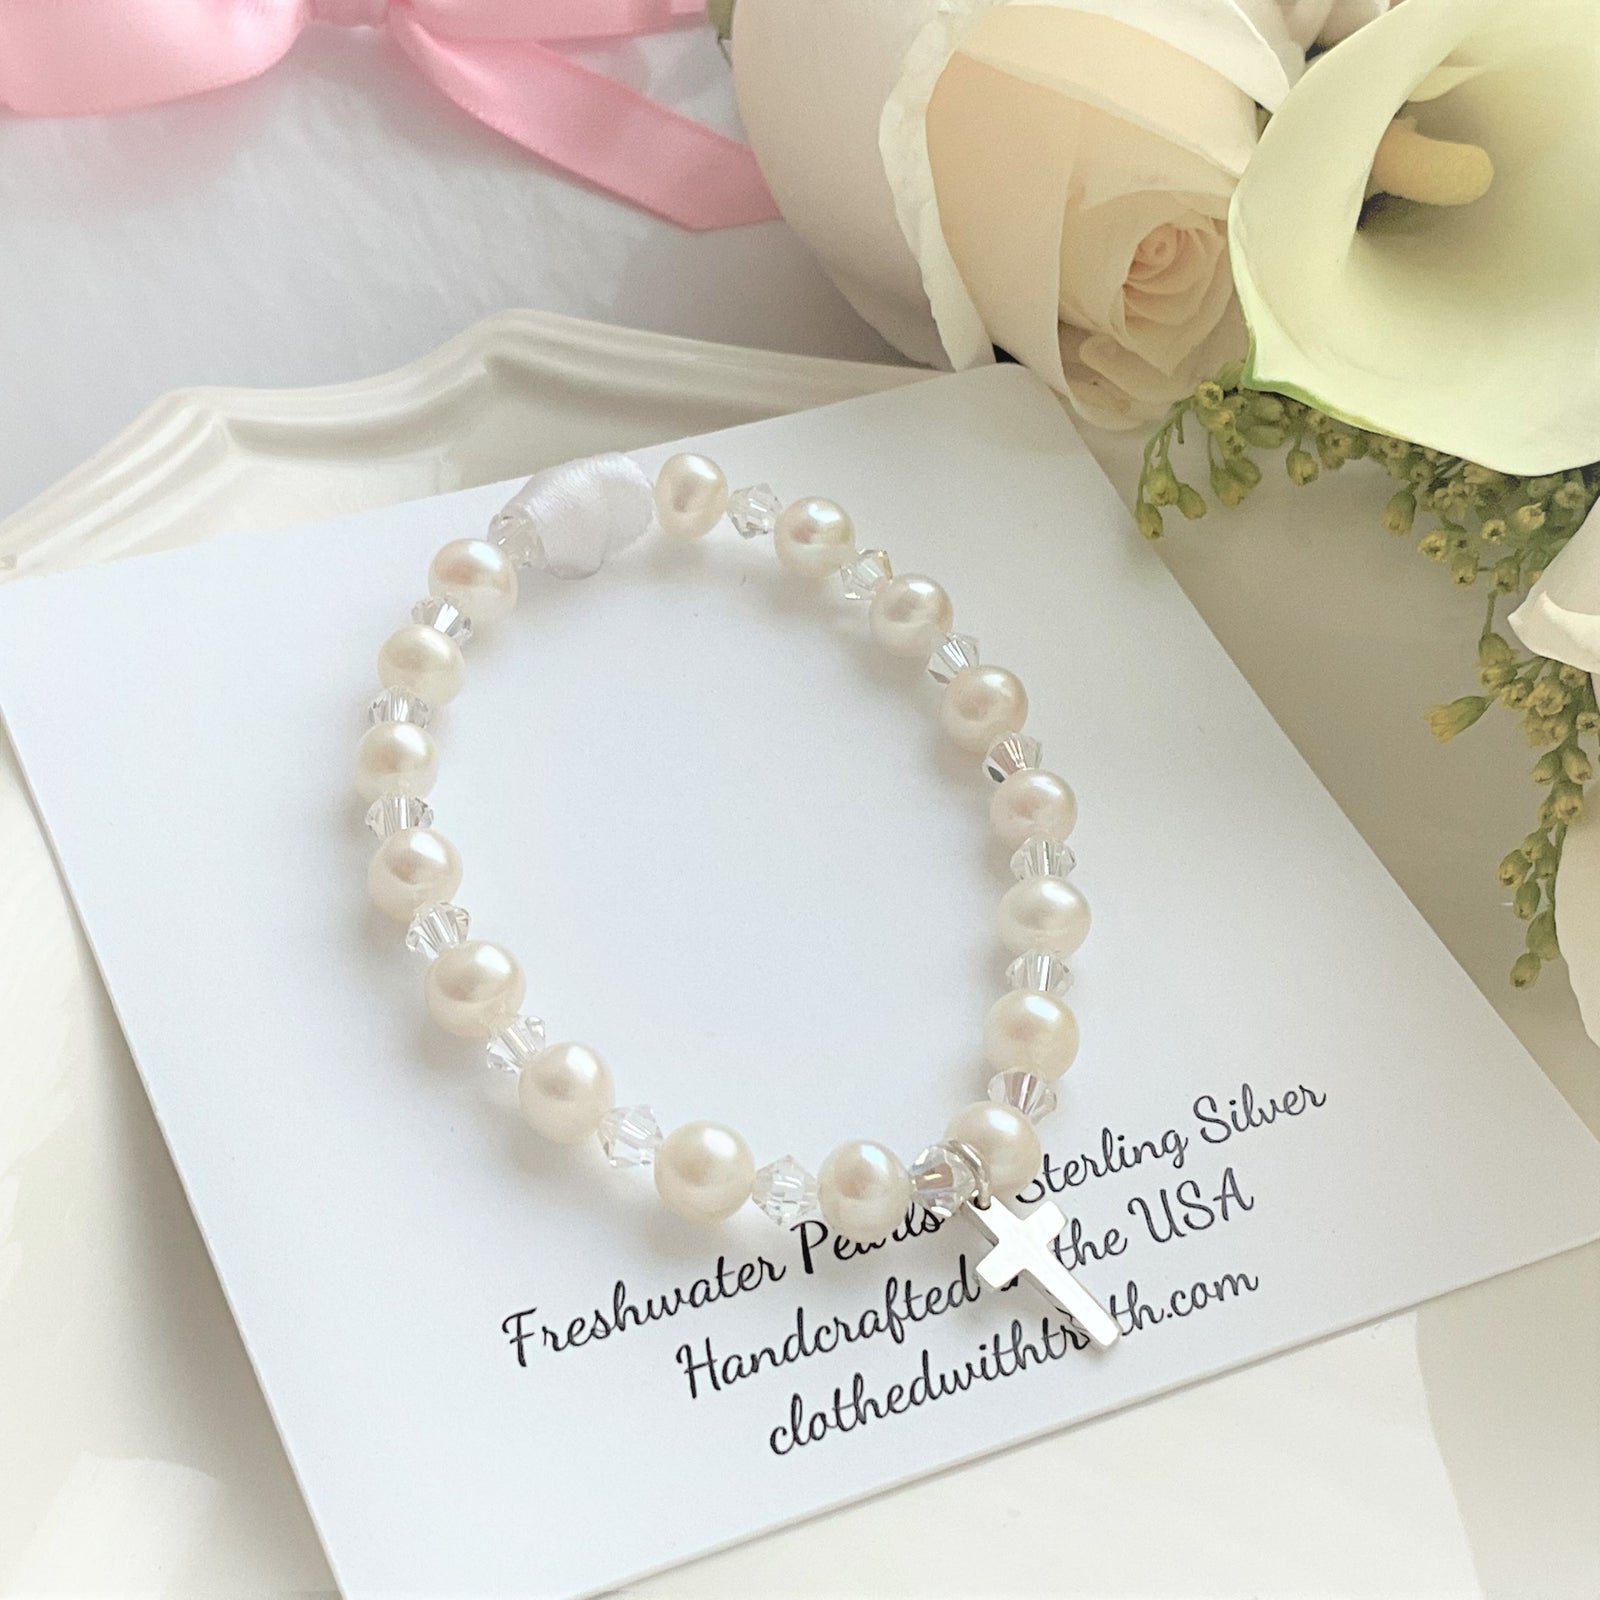 Crystal and Pearl Christening Bracelet By Gifted Memories Faith